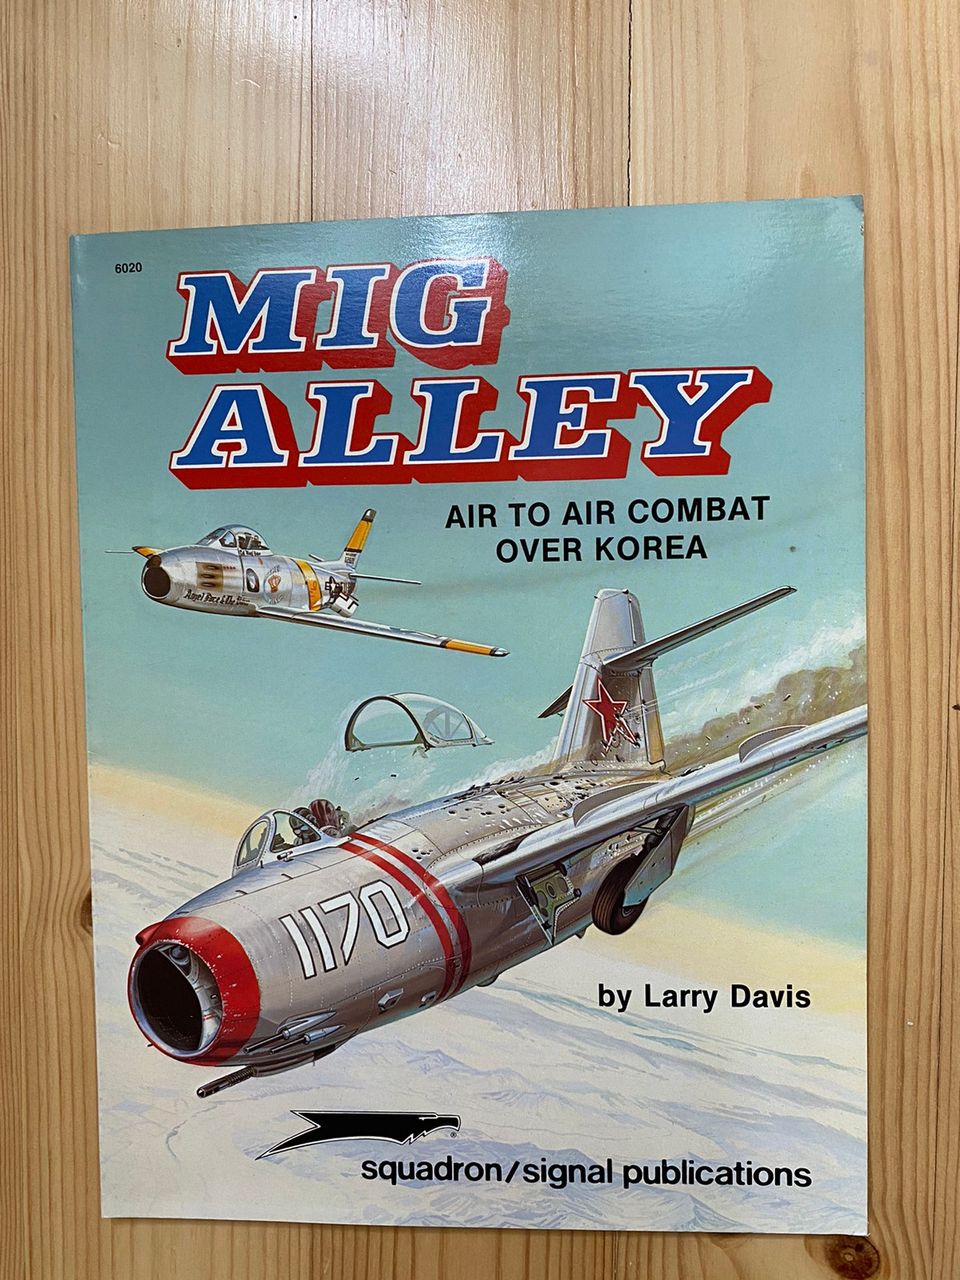 Squadron/signal MiG alley- air to air combat over Korea